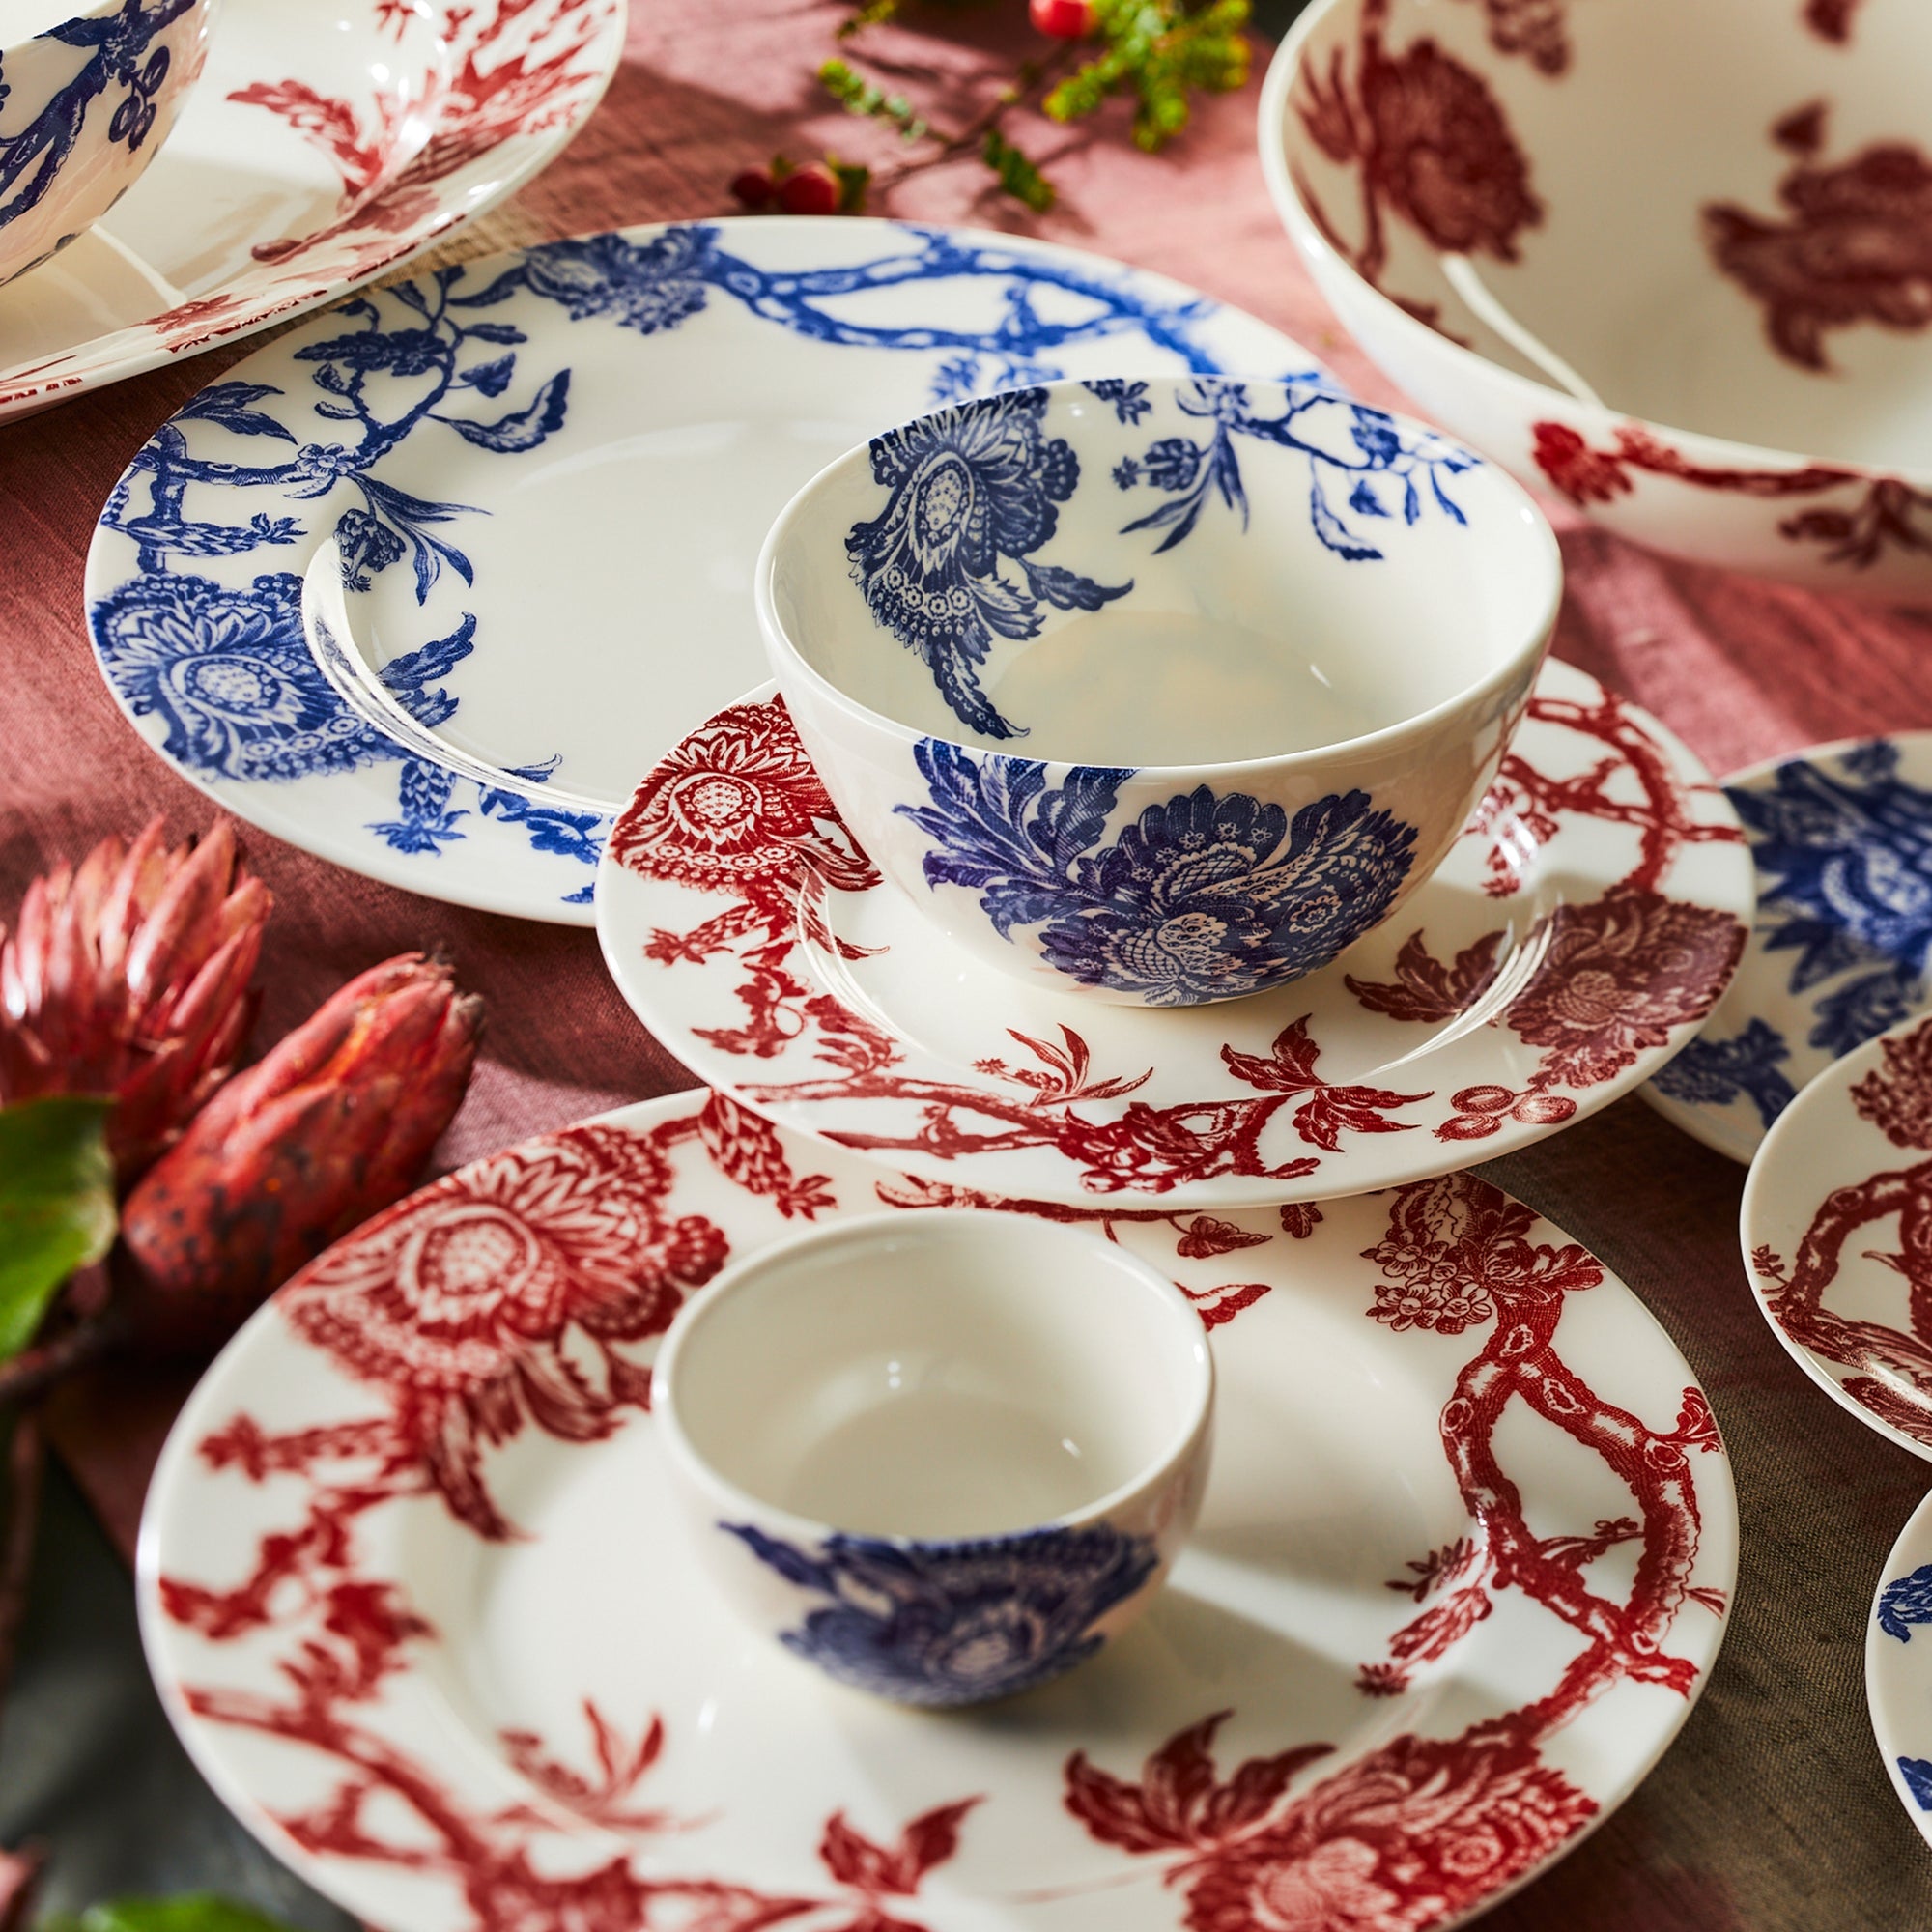 Arcadia Porcelain Dinnerware in Crimson Red and White and Blue and White - part of the dinnerware collections at Caskata